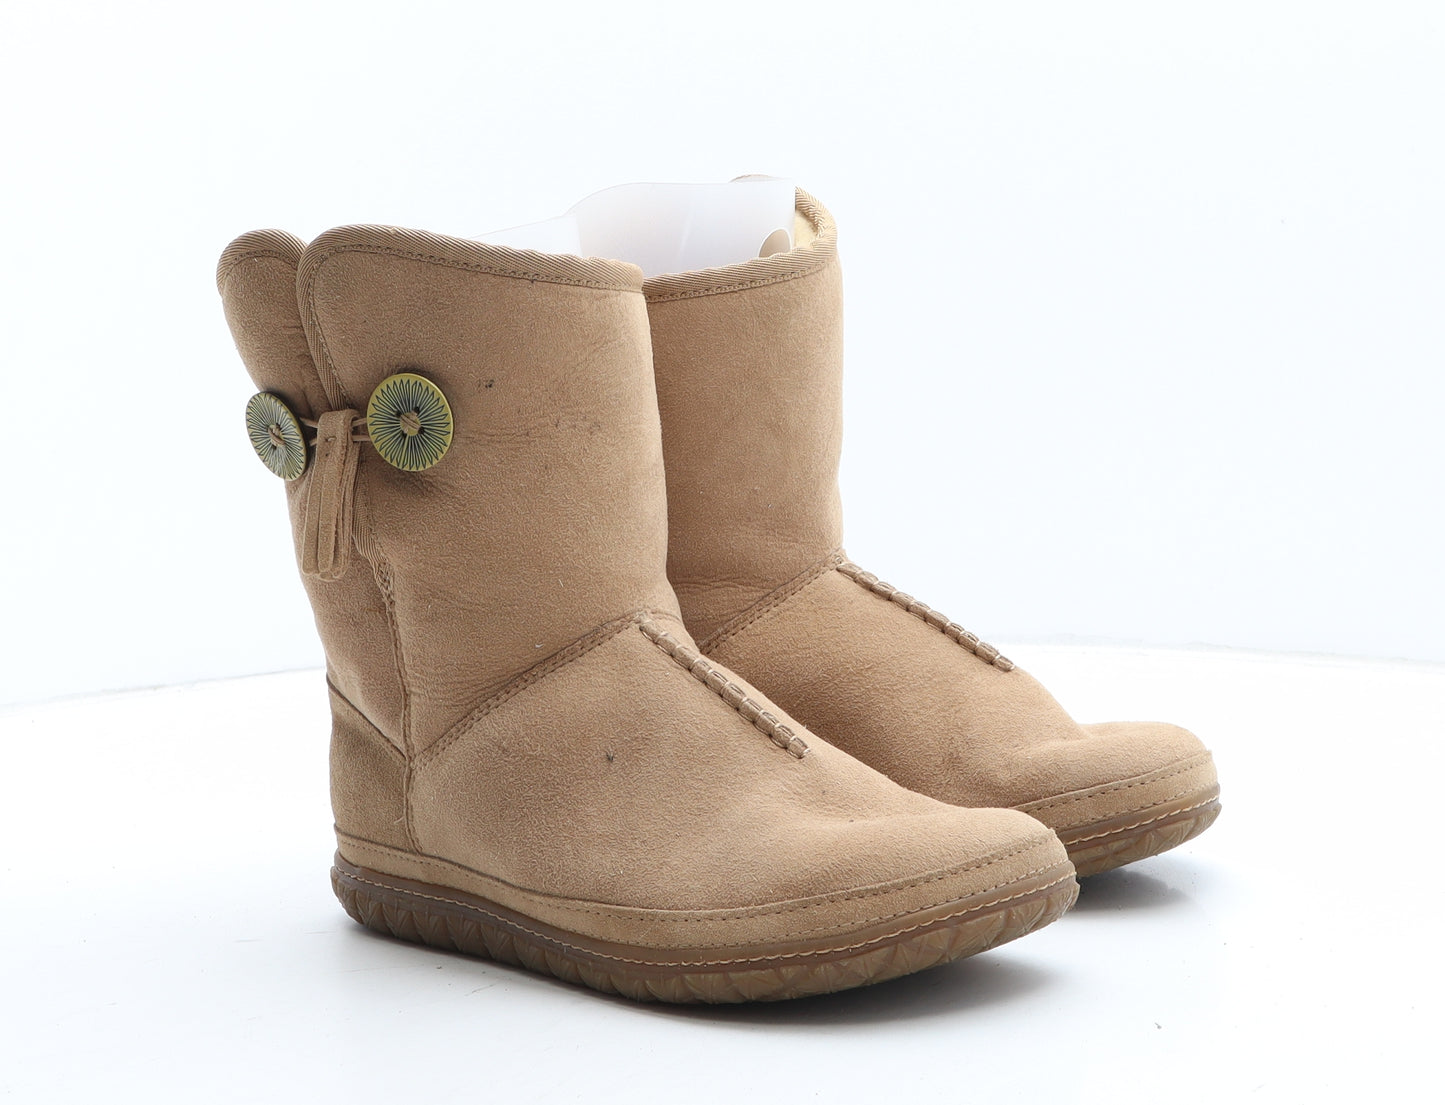 Clarks Womens Beige Fabric Shearling Style Boot UK